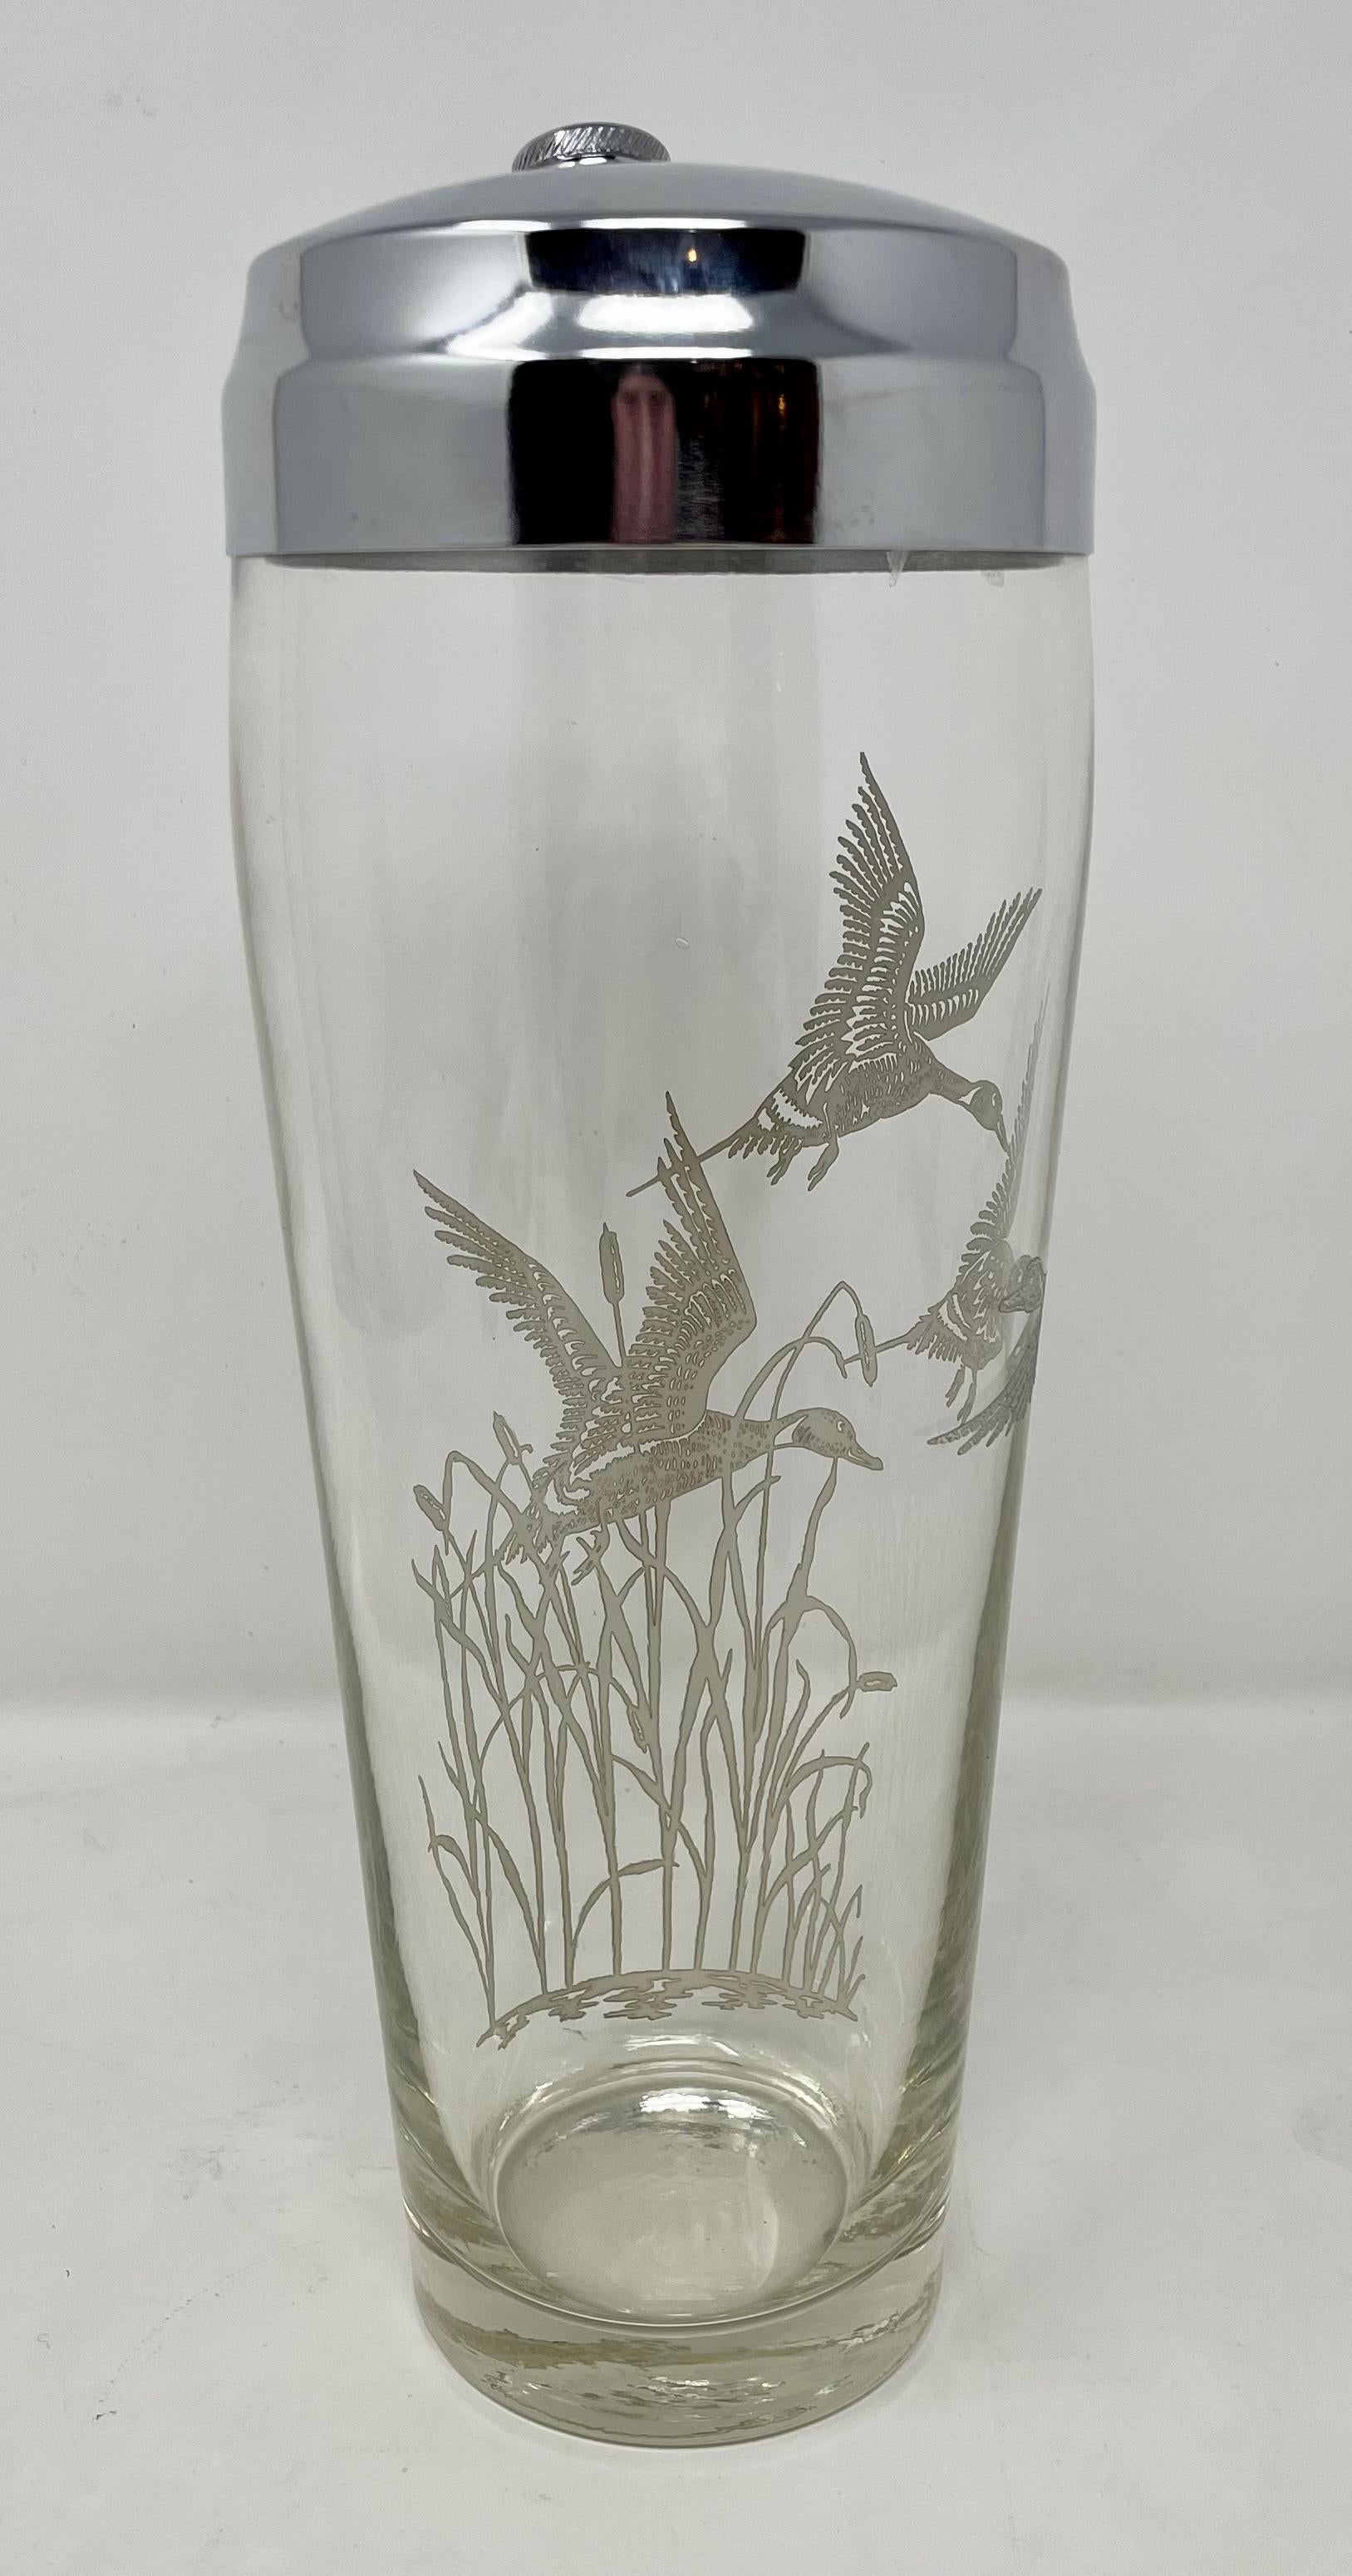 20th Century Estate Retro Cut Crystal & Silver Overlay Cocktail Shaker with Ducks, circa 1950